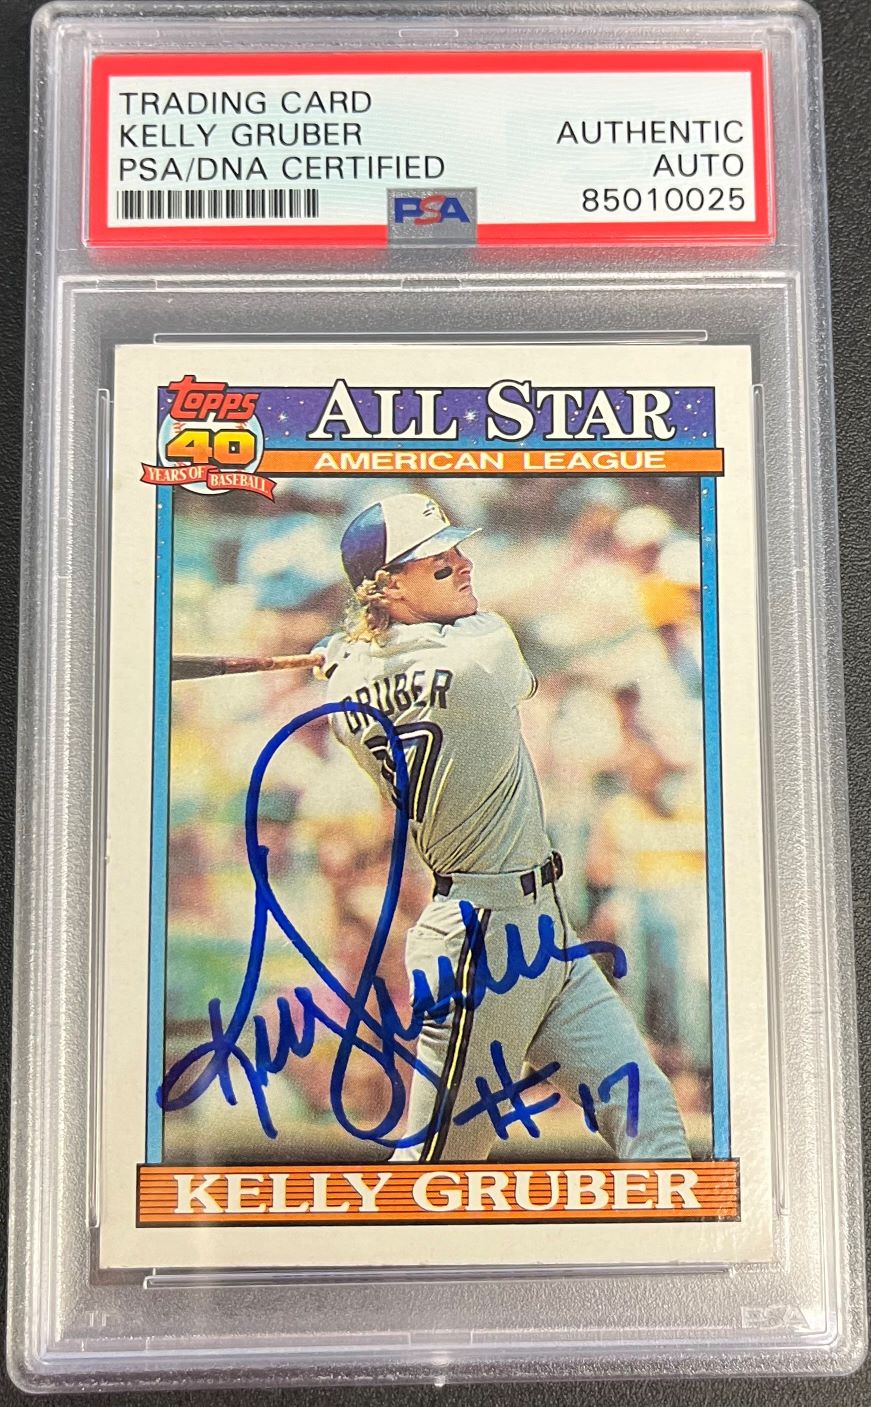 Kelly Gruber Topps 40 Year All Star PSA Auto